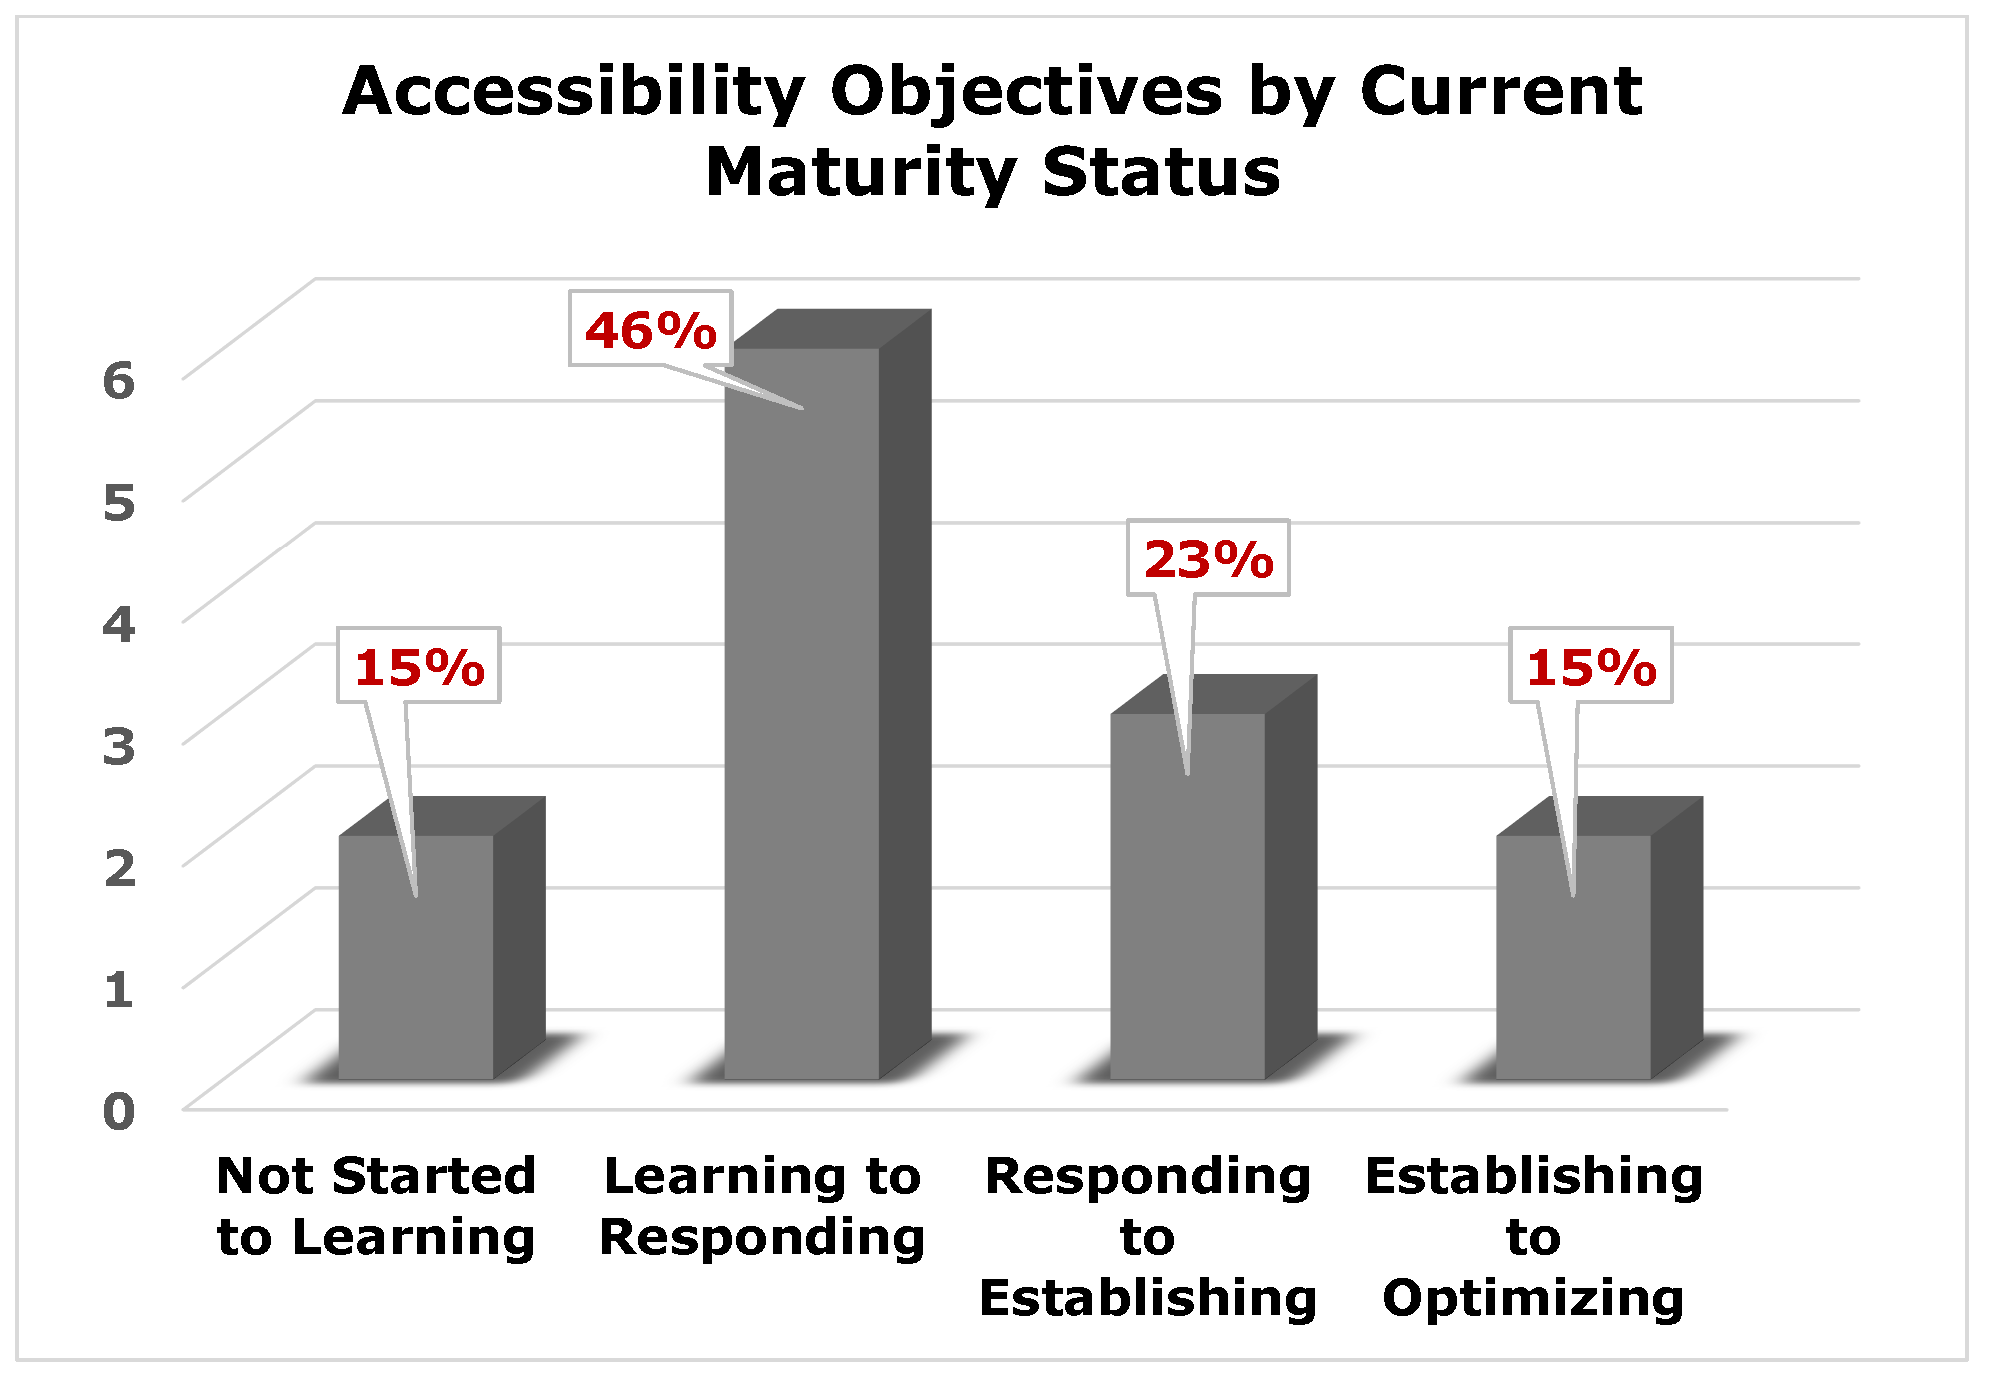 Bar graph illustrating accessibility objectives by current maturity status as described above